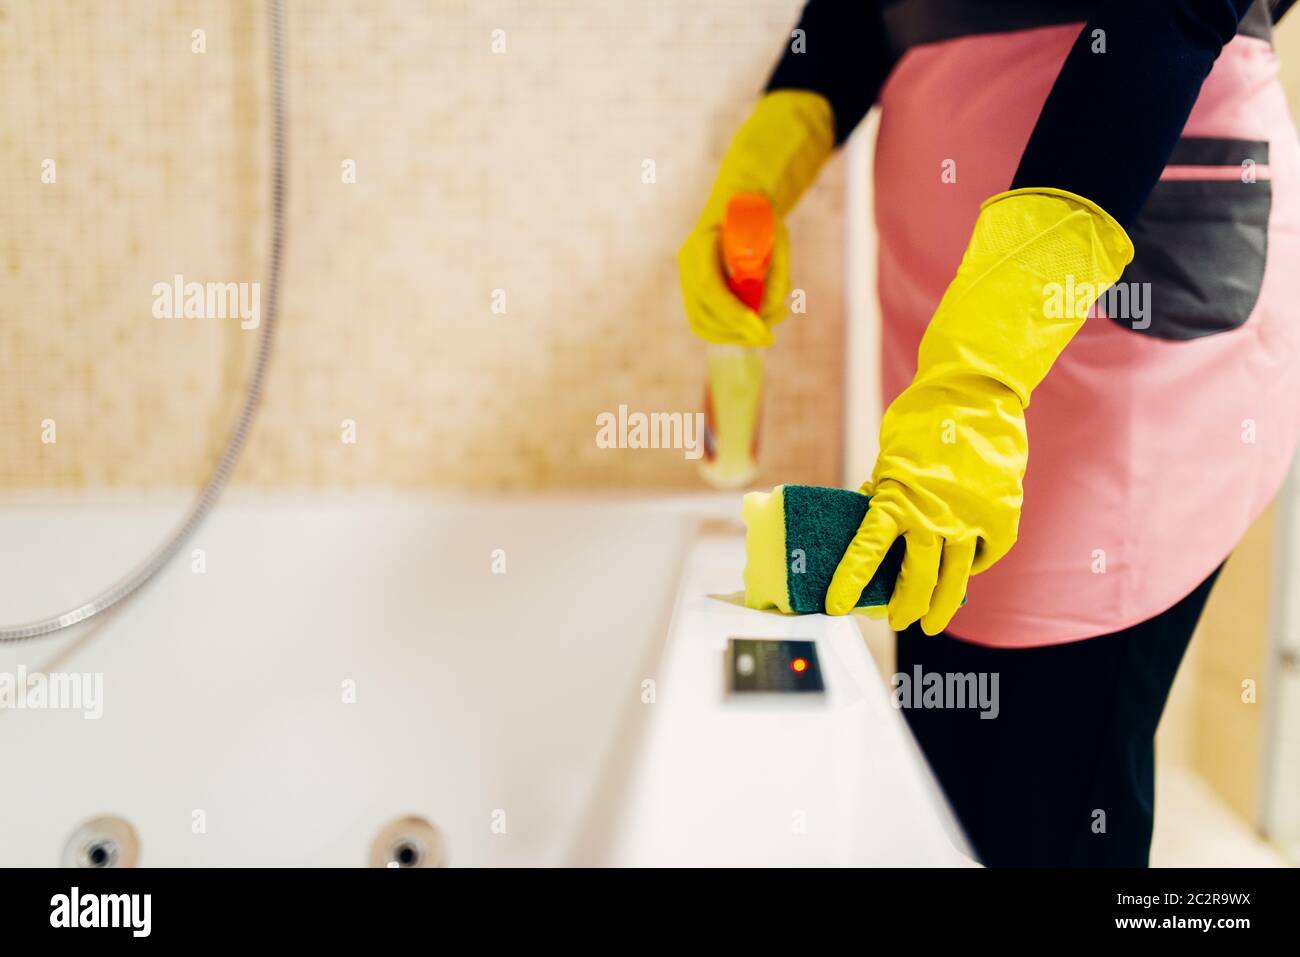 Maid hands in rubber gloves cleans the bathtube with a cleaning spray, hotel bathroom interior on background. Professional housekeeping service, charw Stock Photo